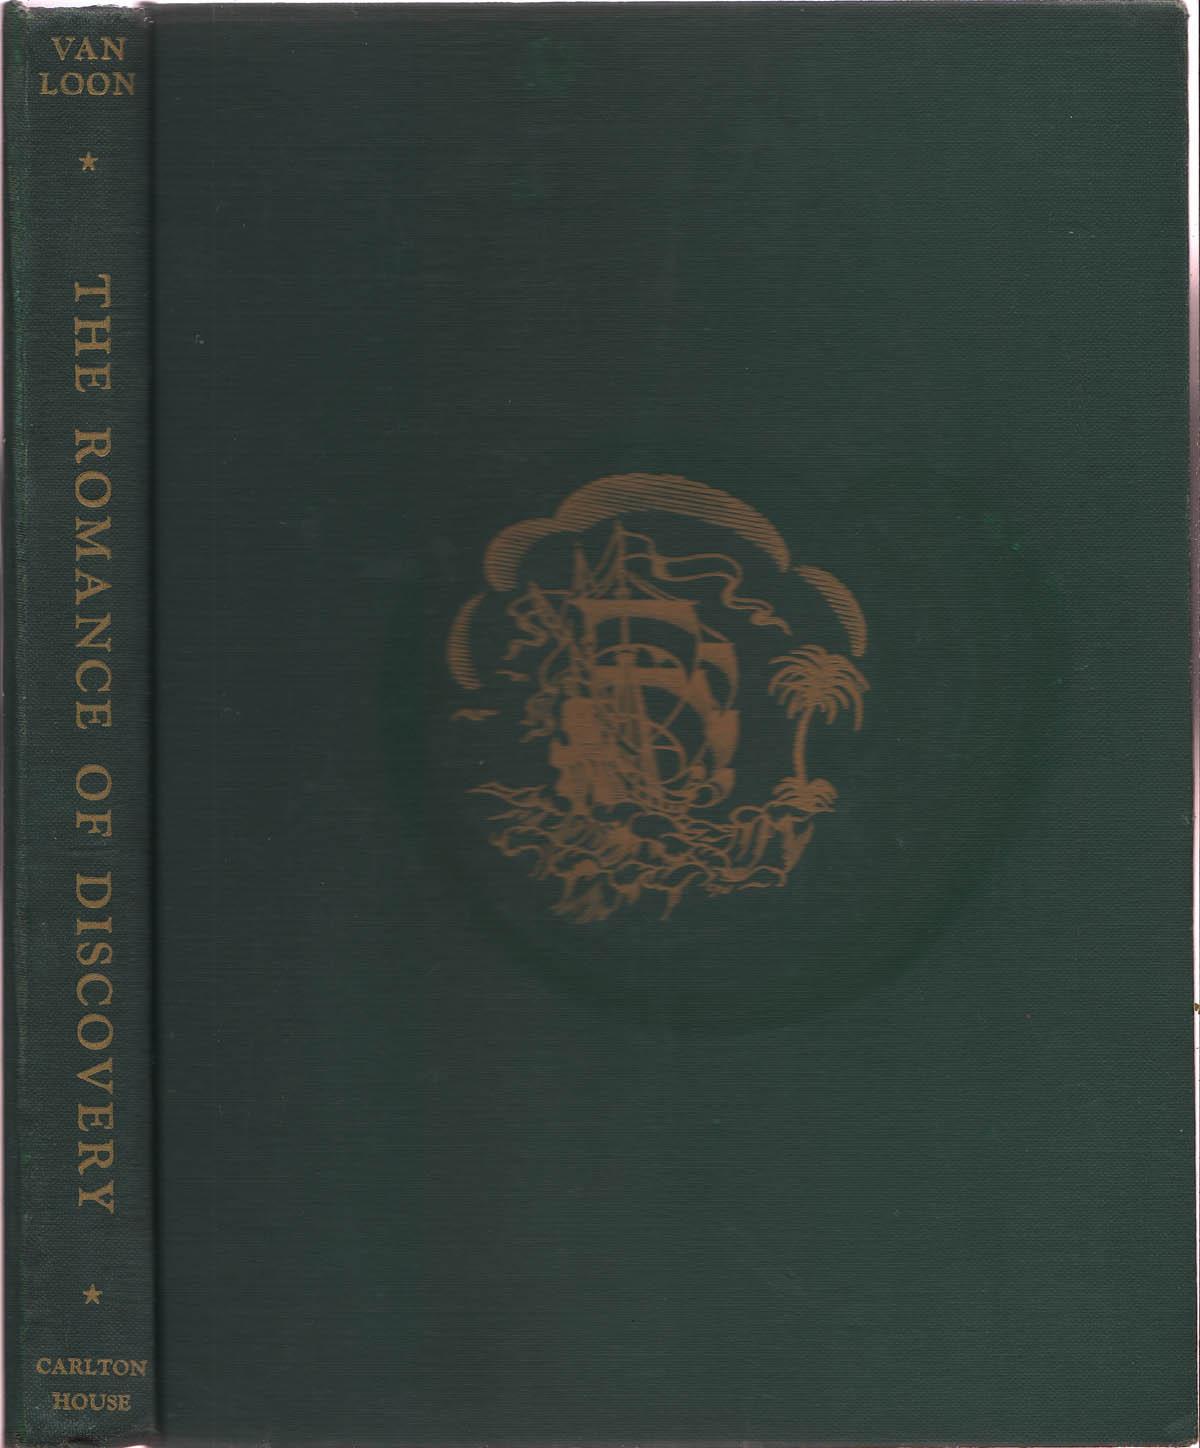 Romance of Discovery: Being an Account of the Earliest Navigators and the Discovery of America, The. - Van Loon, Hendrick Willem , written and drawn and done into color by.